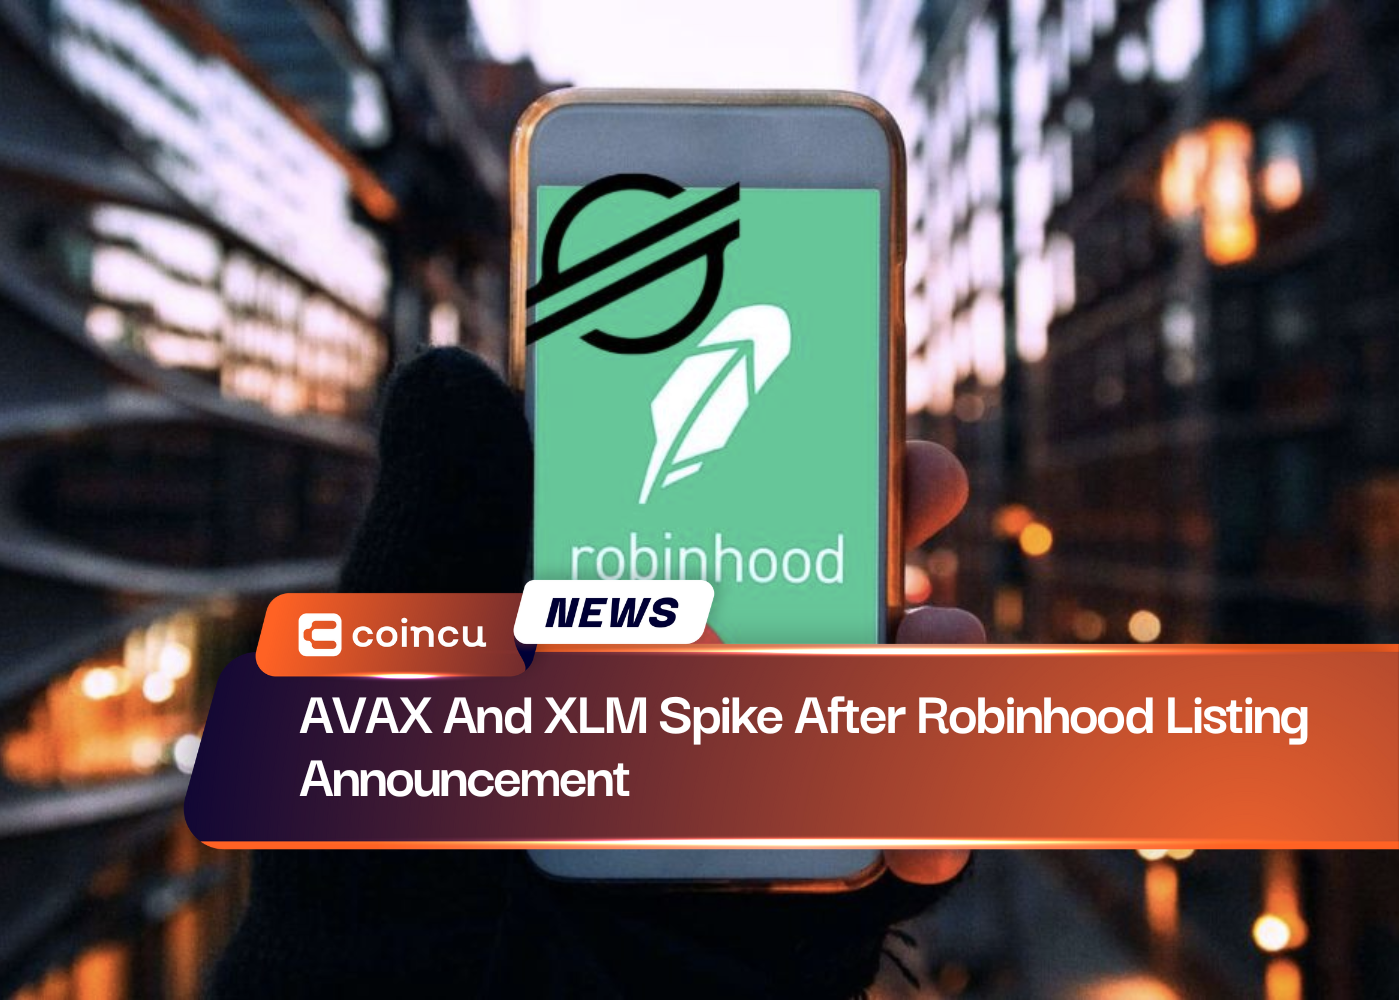 AVAX And XLM Spike After Robinhood Listing Announcement